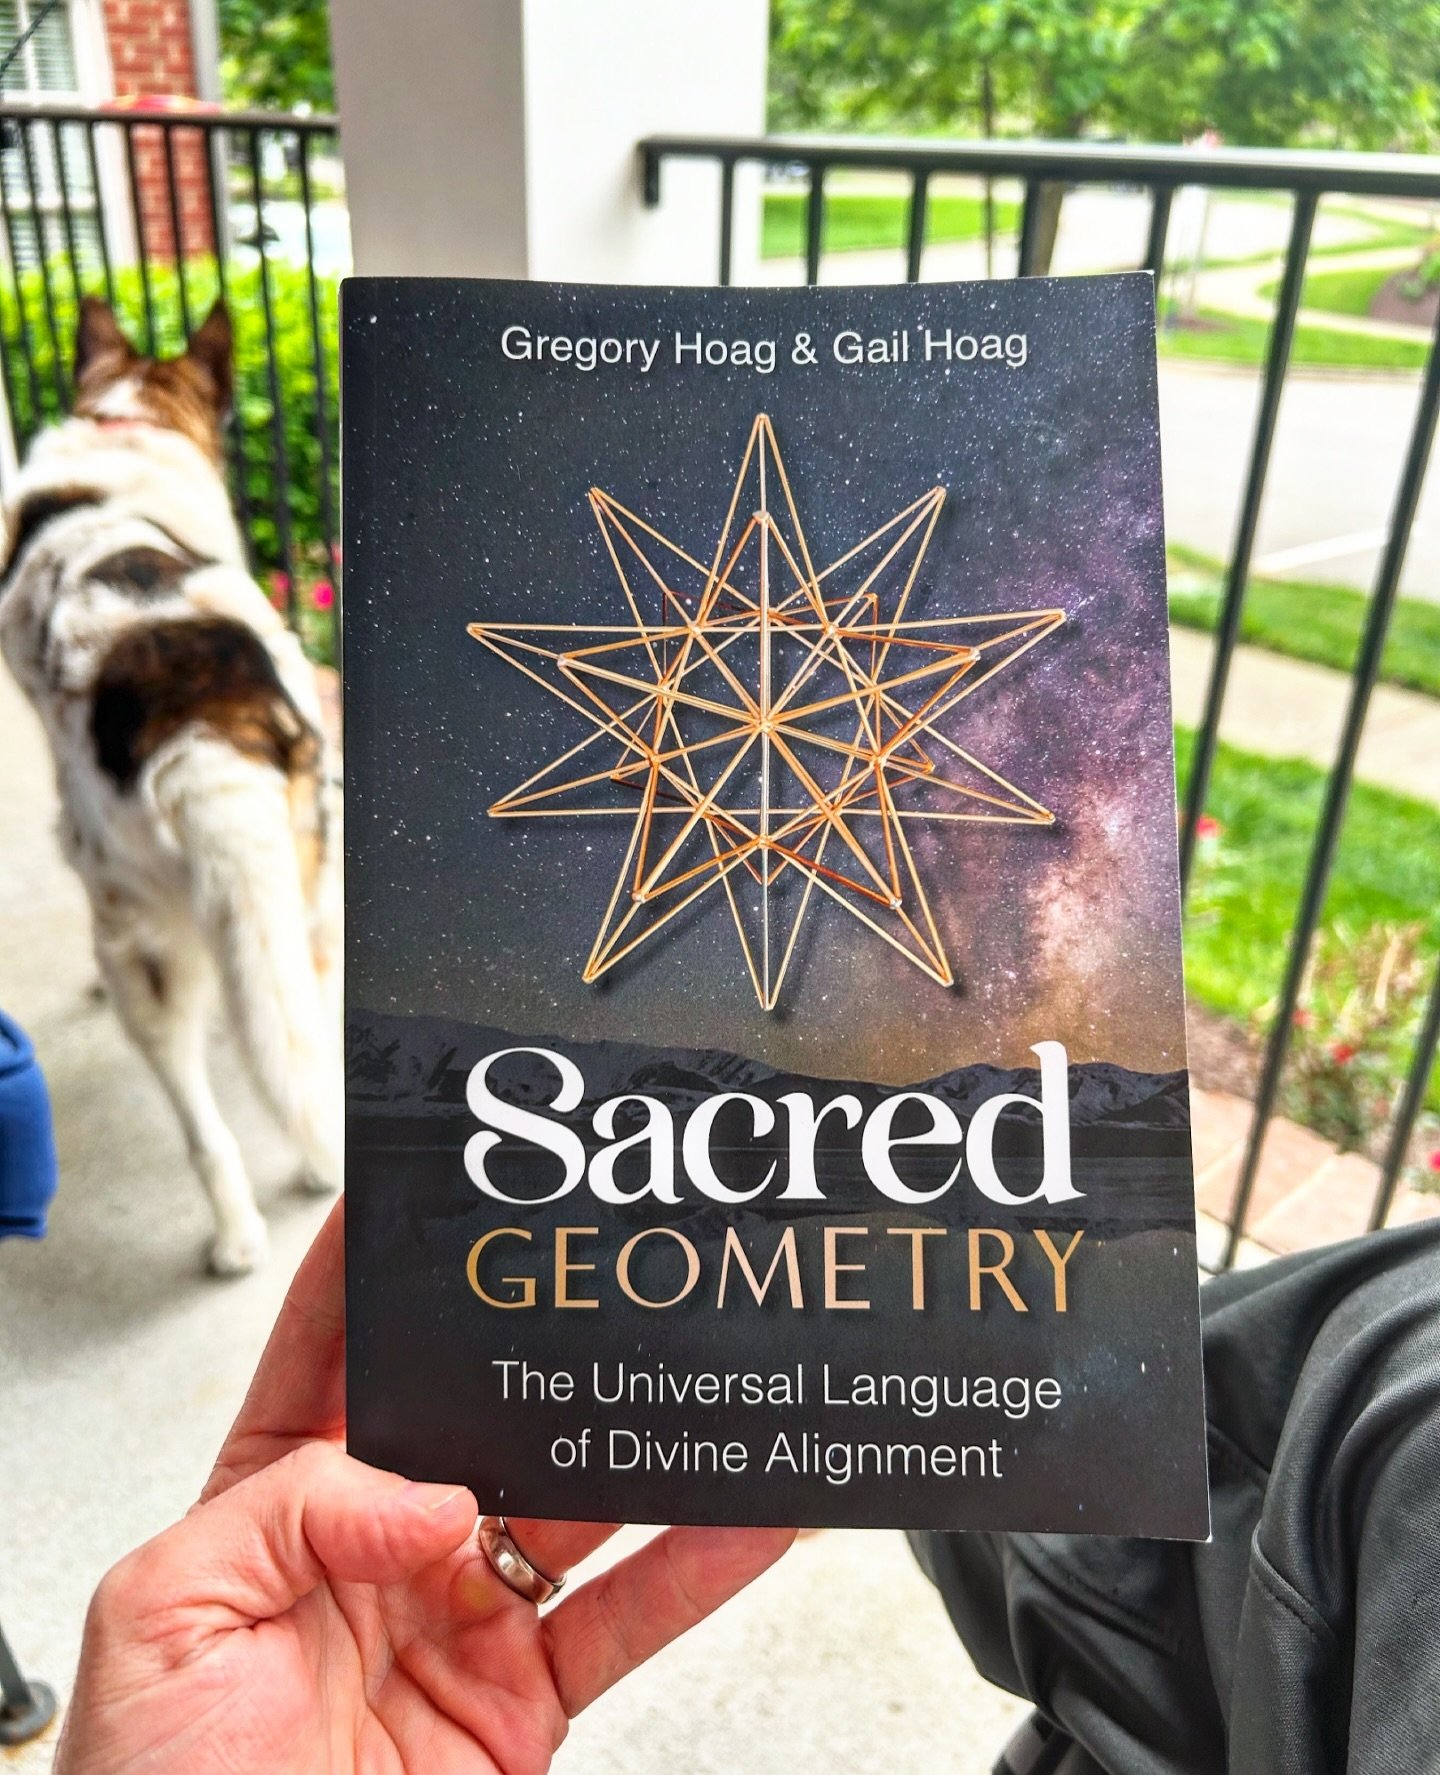 ♾️ Re-familiarizing myself with the language of the multiverse.

#sacredgeometry